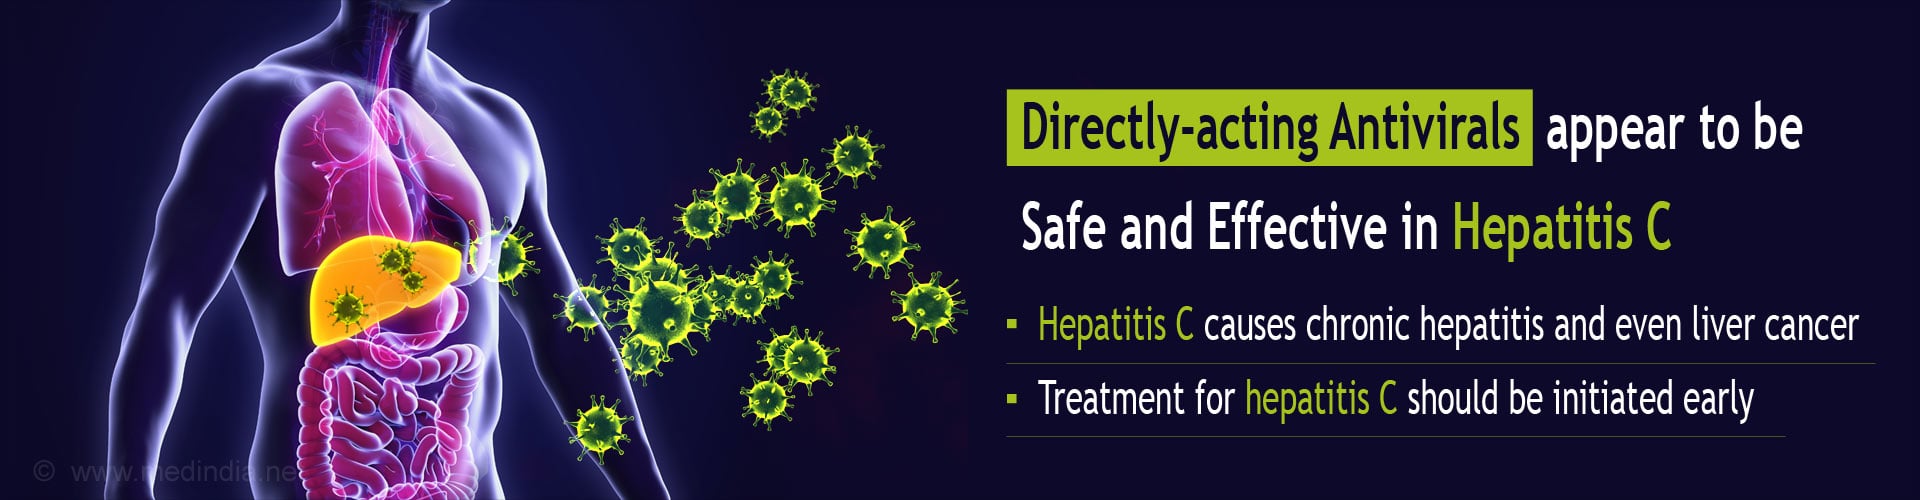 Directly-acting antivirals appear to be safe and effective in hepatitis C
- Hepatitis C causes chronic hepatitis and even liver cancer
- Treament for hepatitis C should be initiated early